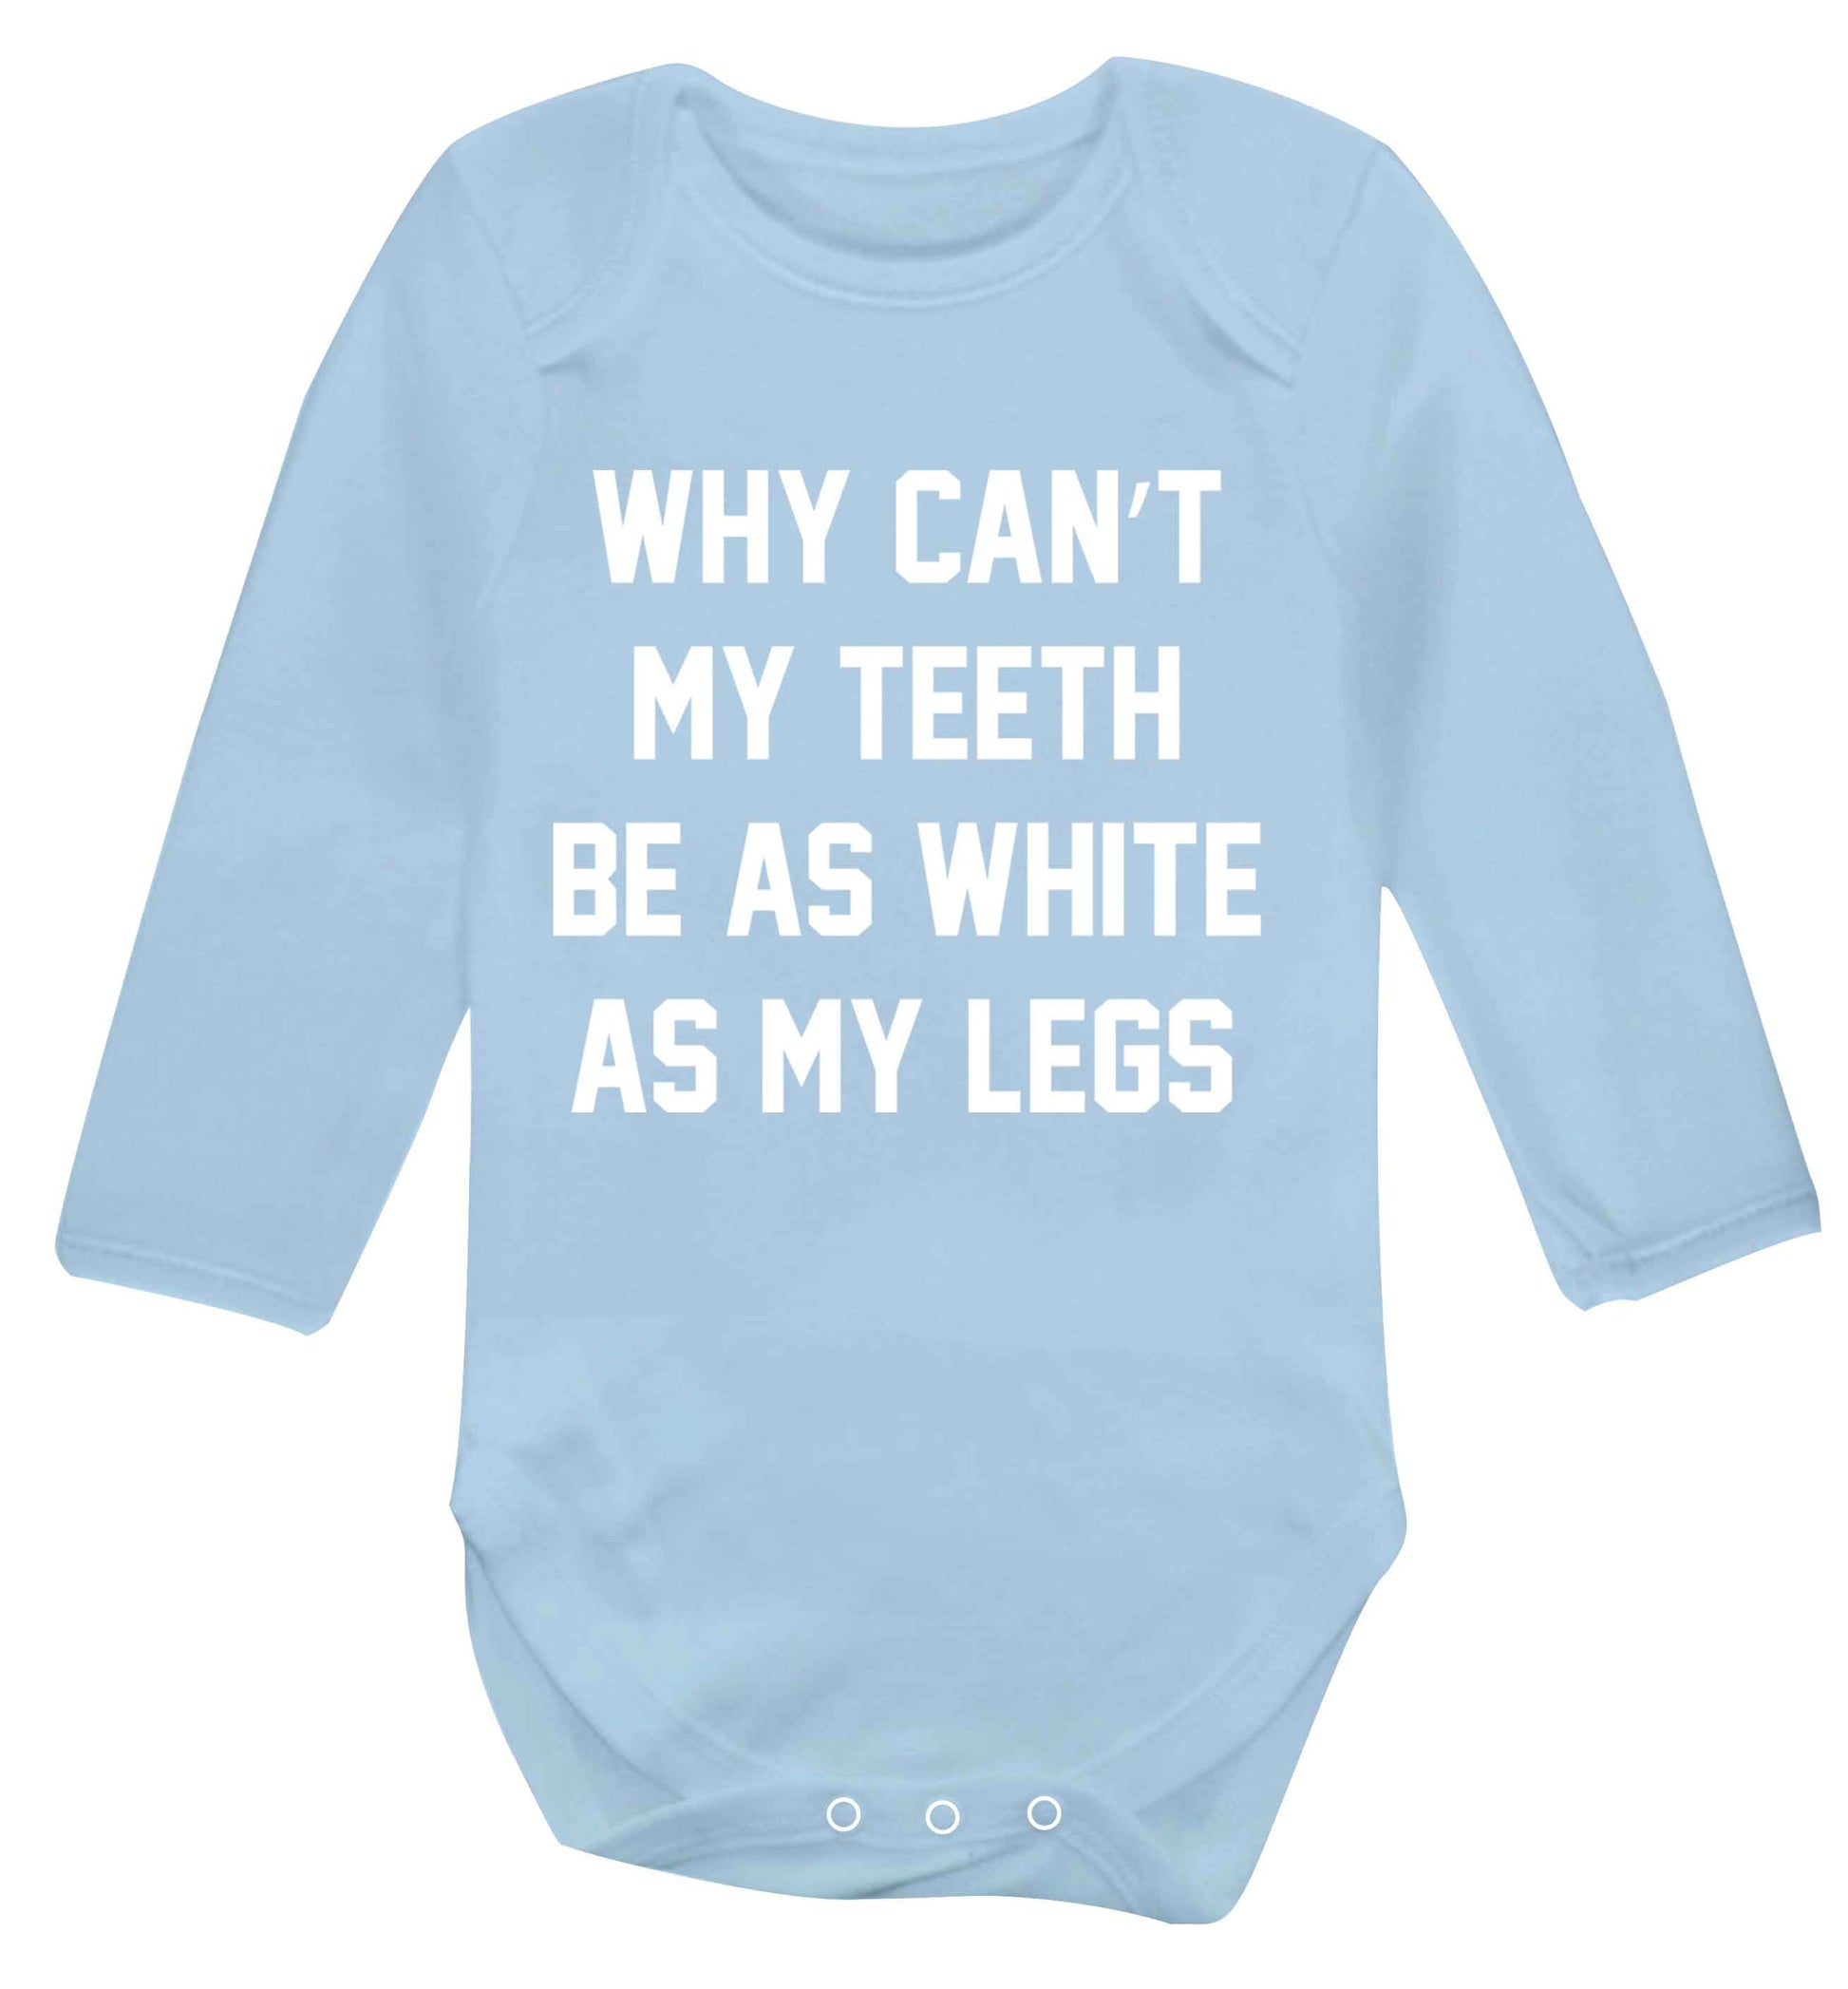 Why can't my teeth be as white as my legs Baby Vest long sleeved pale blue 6-12 months